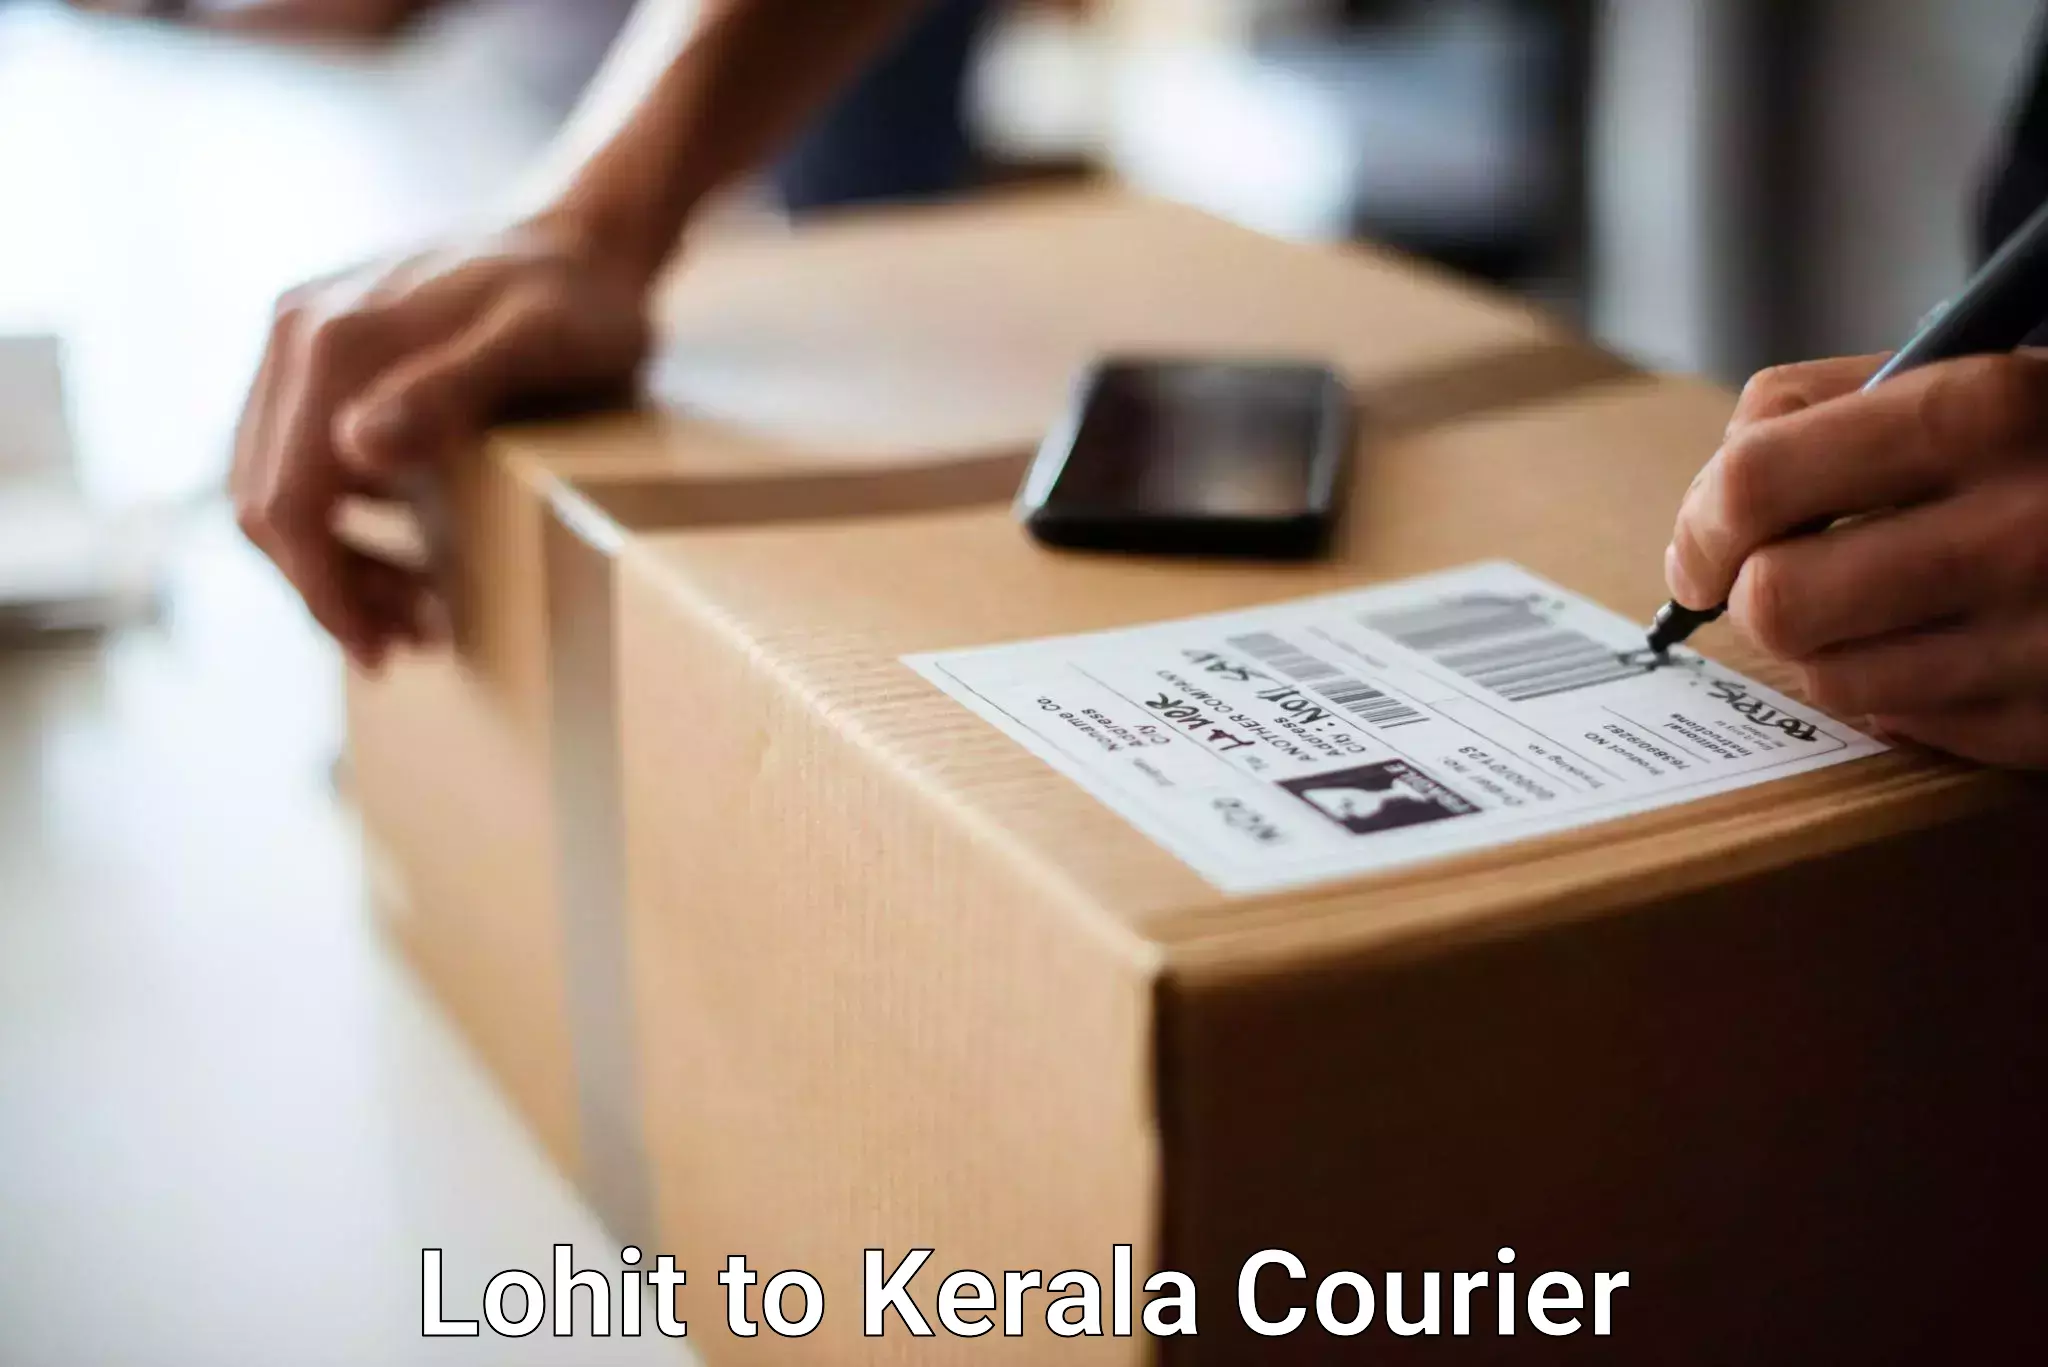 High-quality baggage shipment in Lohit to Alathur Malabar